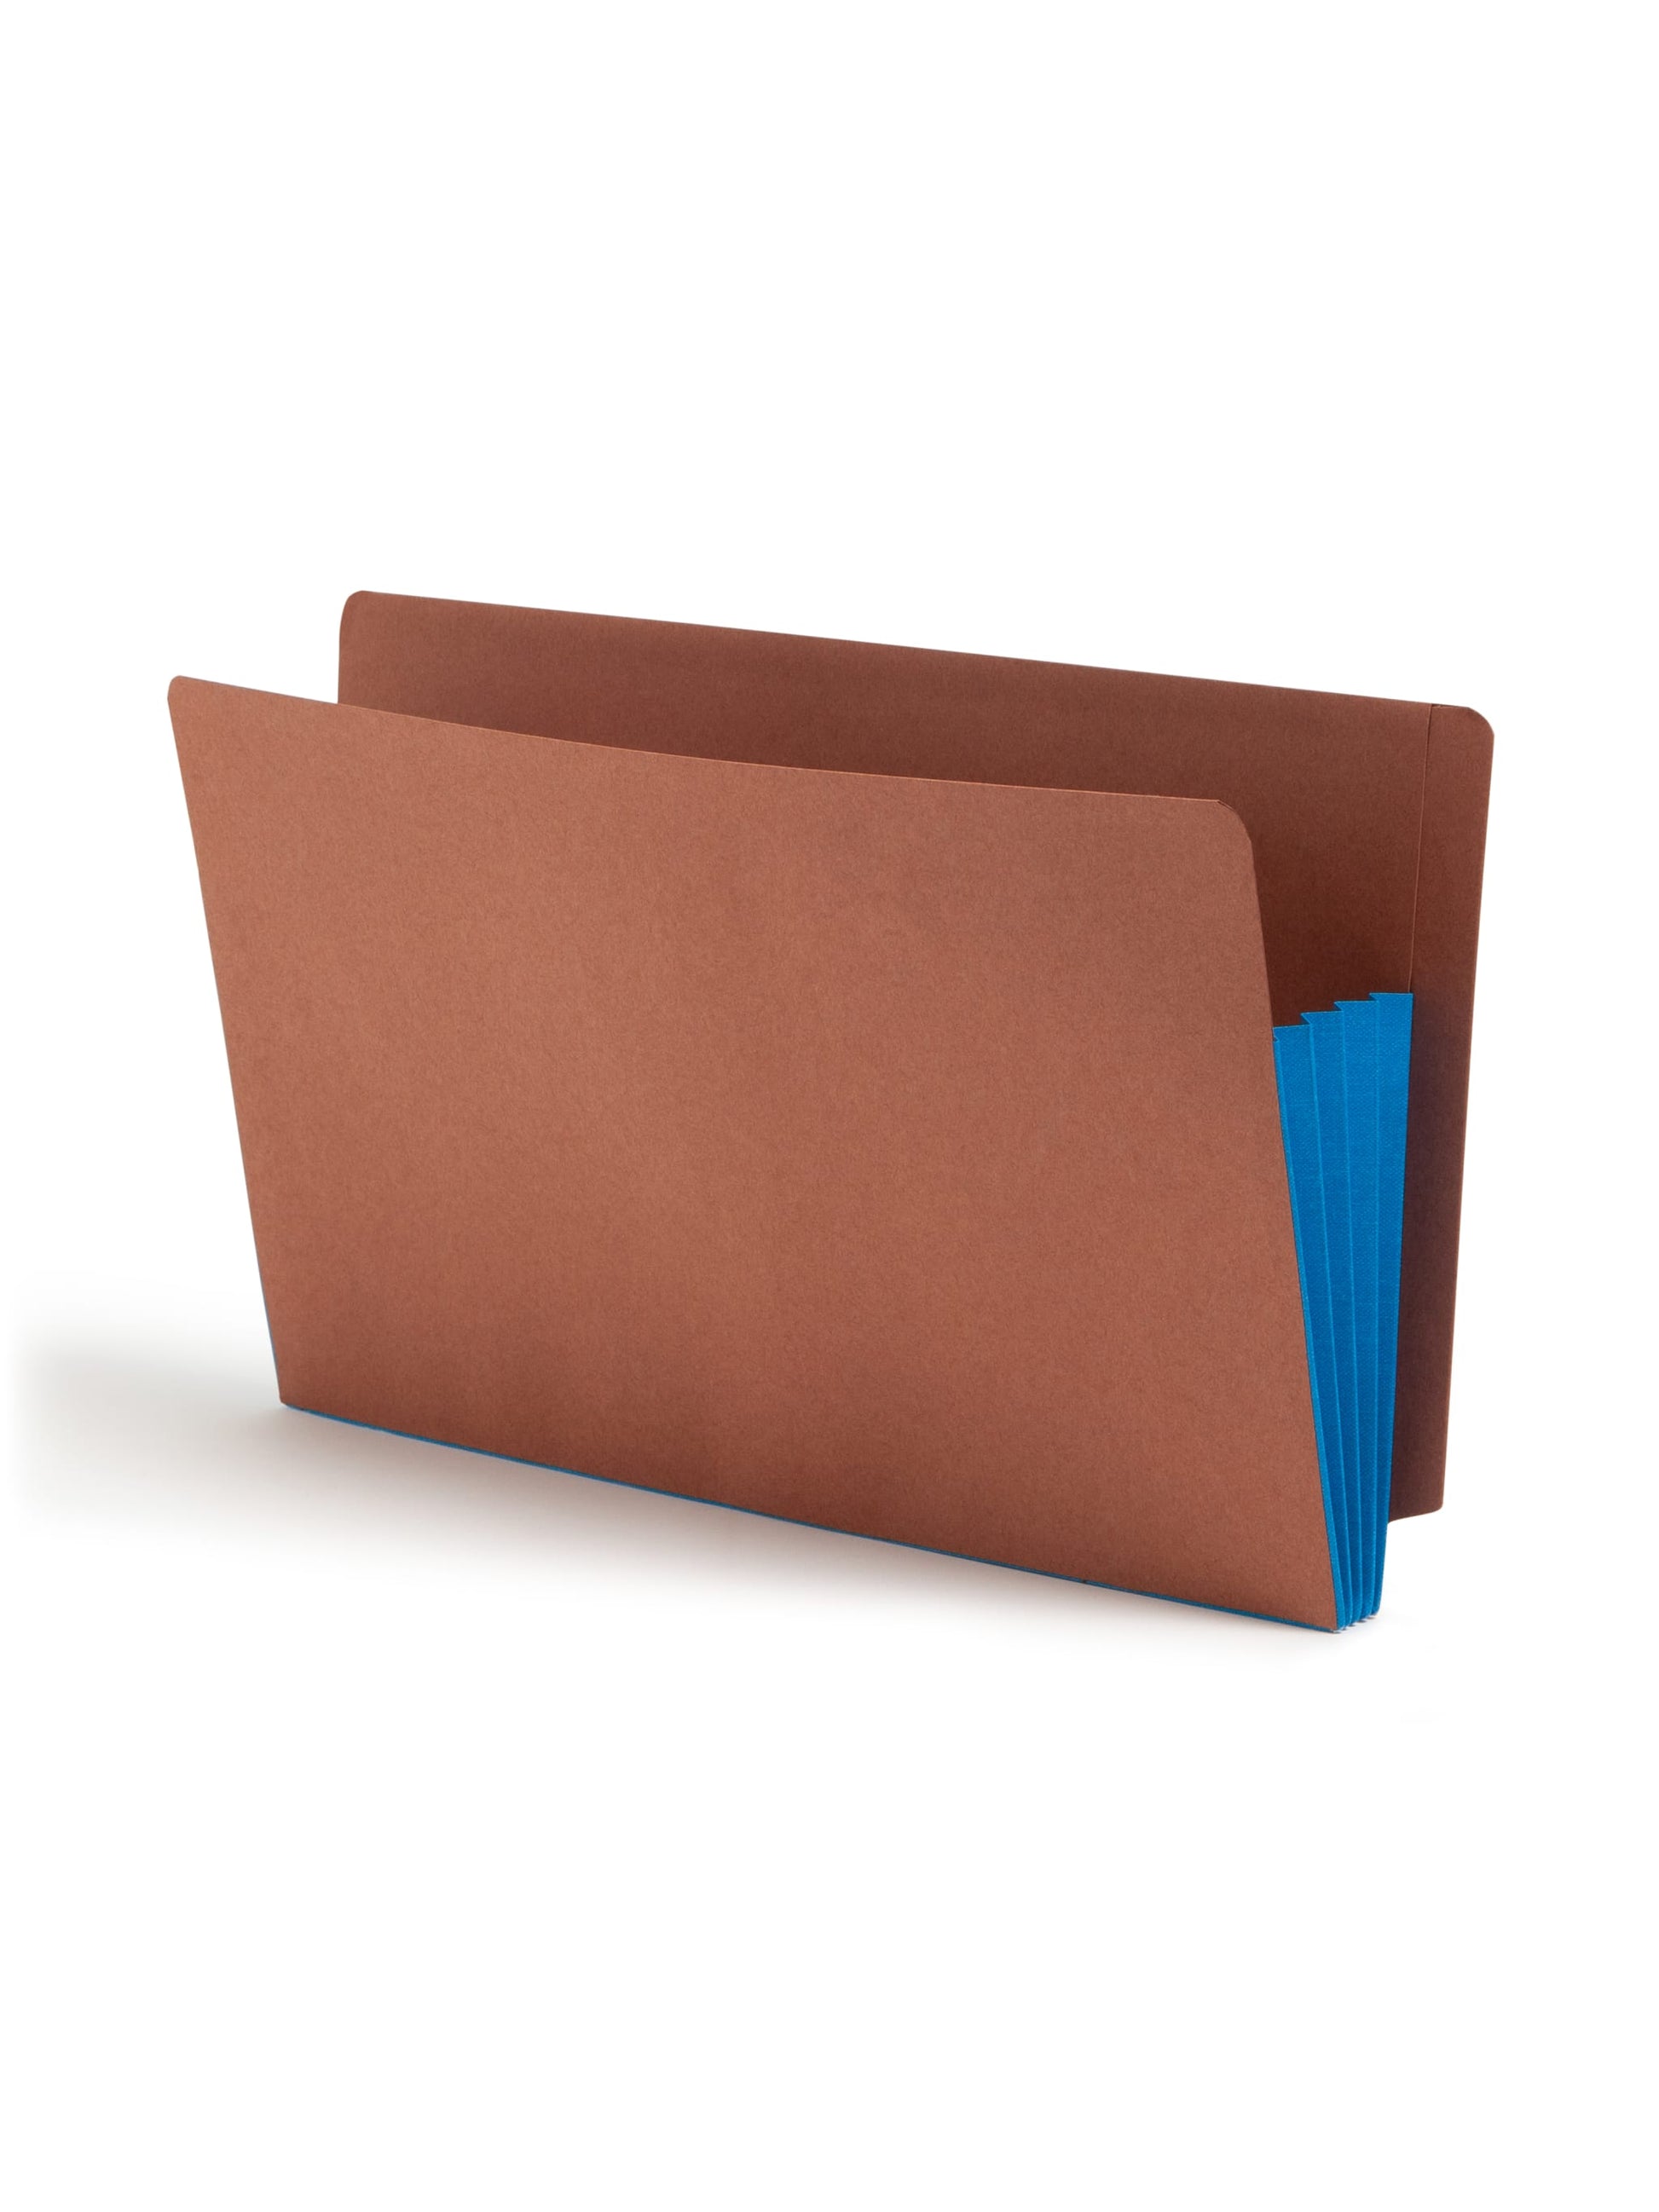 Reinforced End Tab File Pockets, Straight-Cut Tab, 3-1/2 inch Expansion, Blue Color, Extra Wide Legal Size, Set of 0, 30086486746794